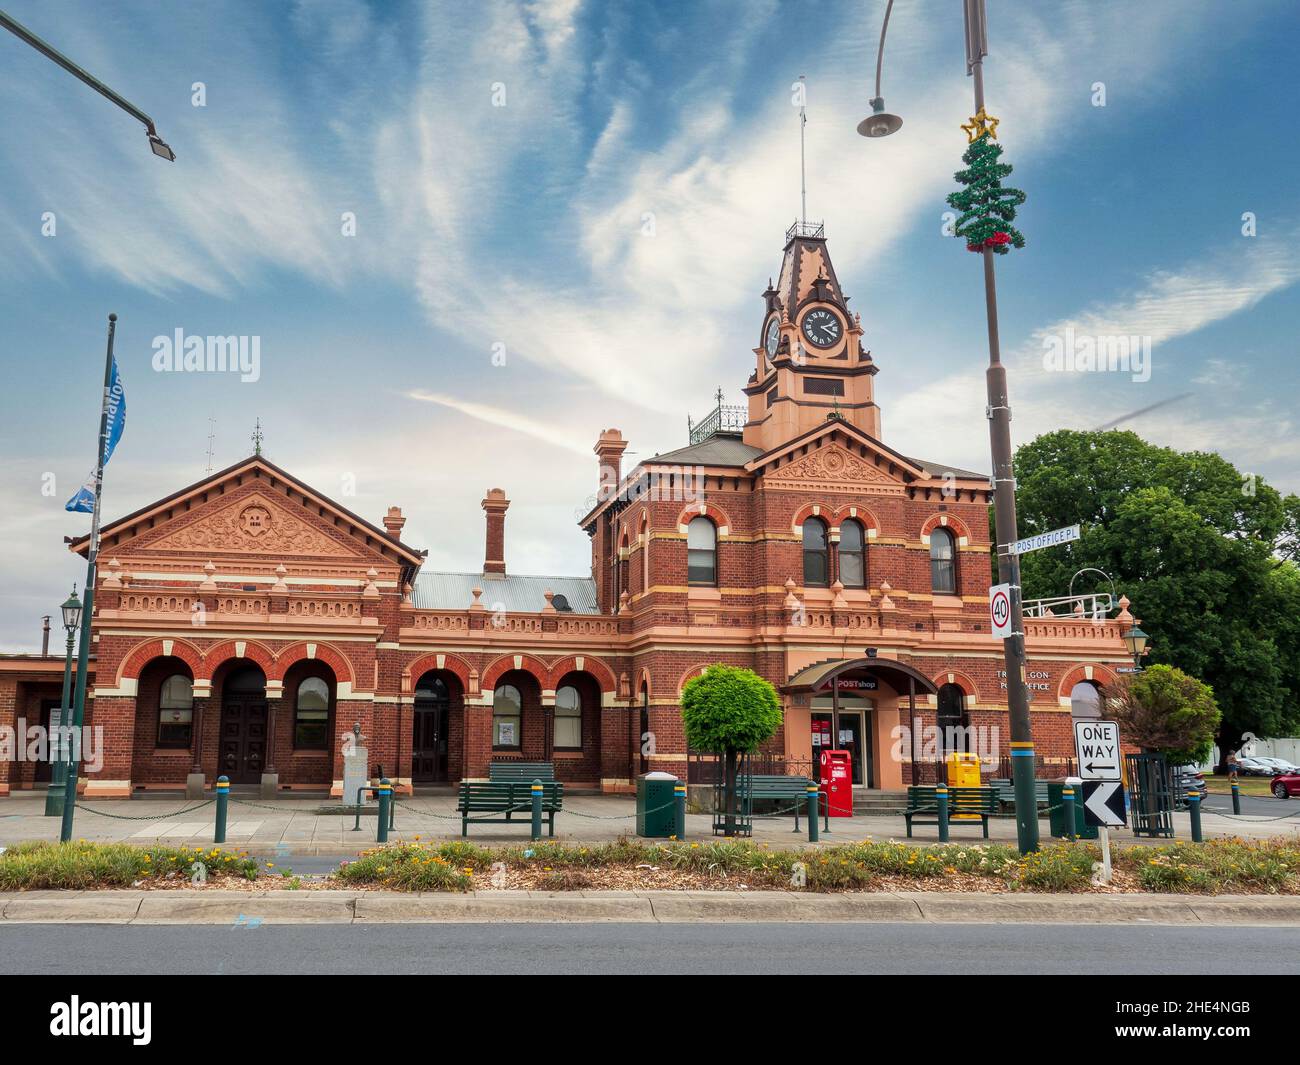 Traralgon post office, an iconic building in the region of Gippsland east of Melbourne. Traralgon, Victoria, Australia - January 2022. Stock Photo